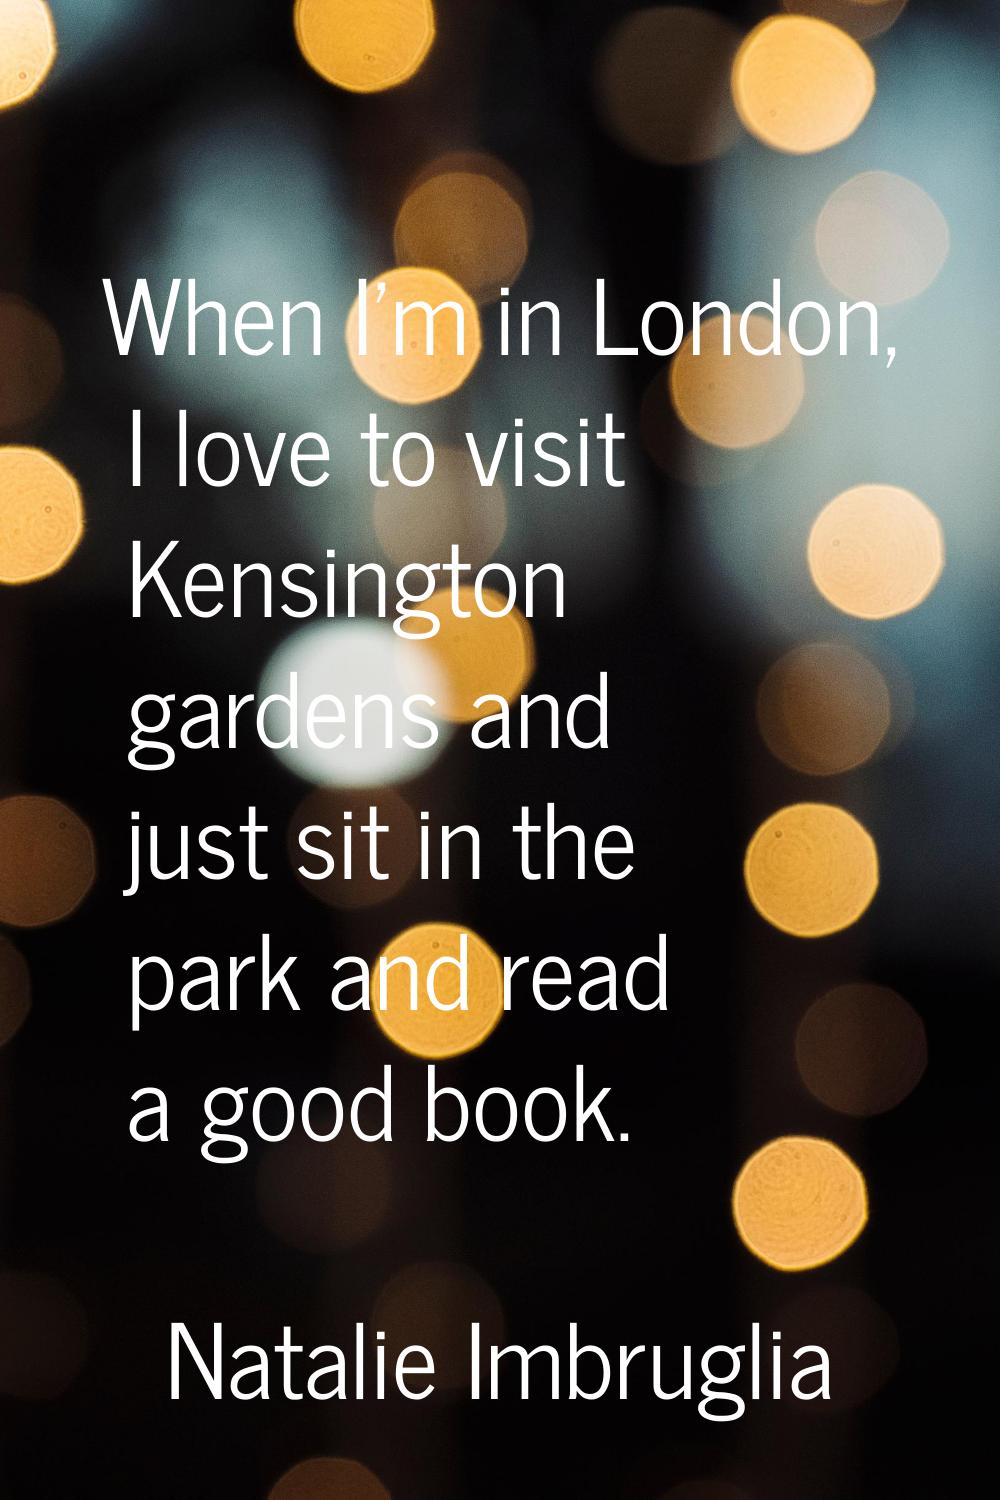 When I'm in London, I love to visit Kensington gardens and just sit in the park and read a good boo